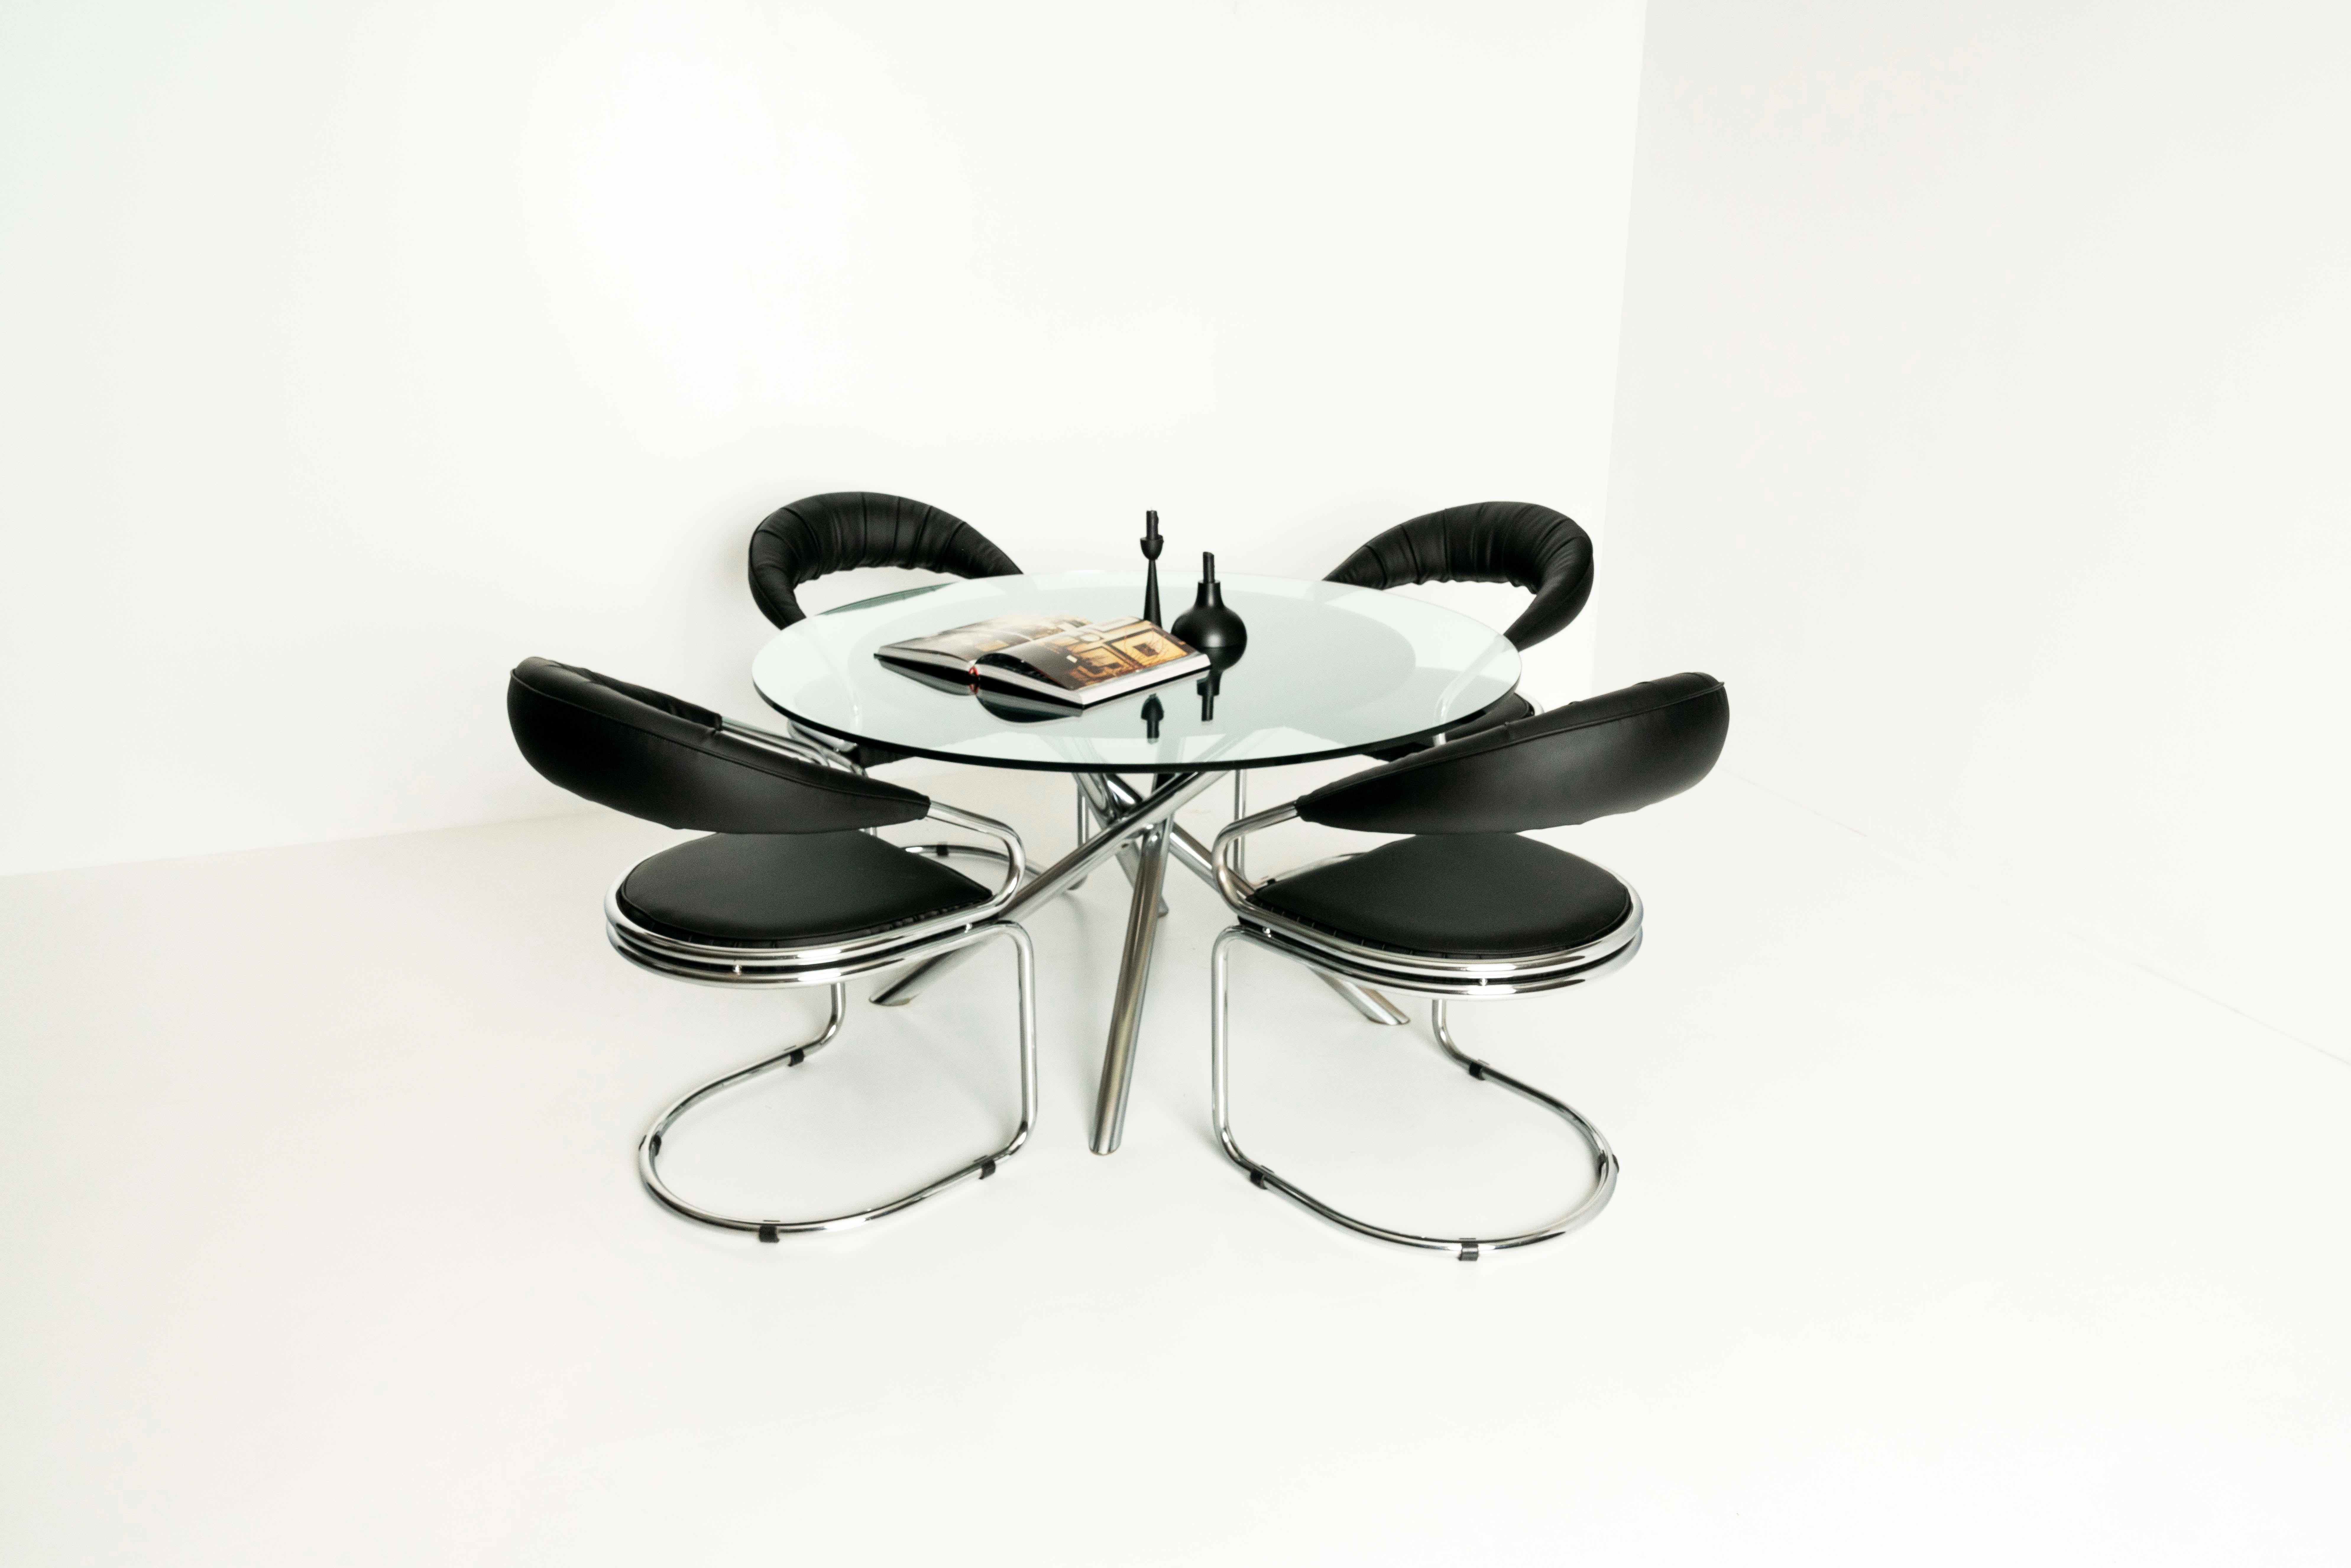 Very nice dining room set by Giotto Stoppino from the 1970s in Italy. This set consists of a dining table and four matching dining room chairs. The table has a tubular, chrome-plated metal base, a textile cover, and a glass top. It is in good